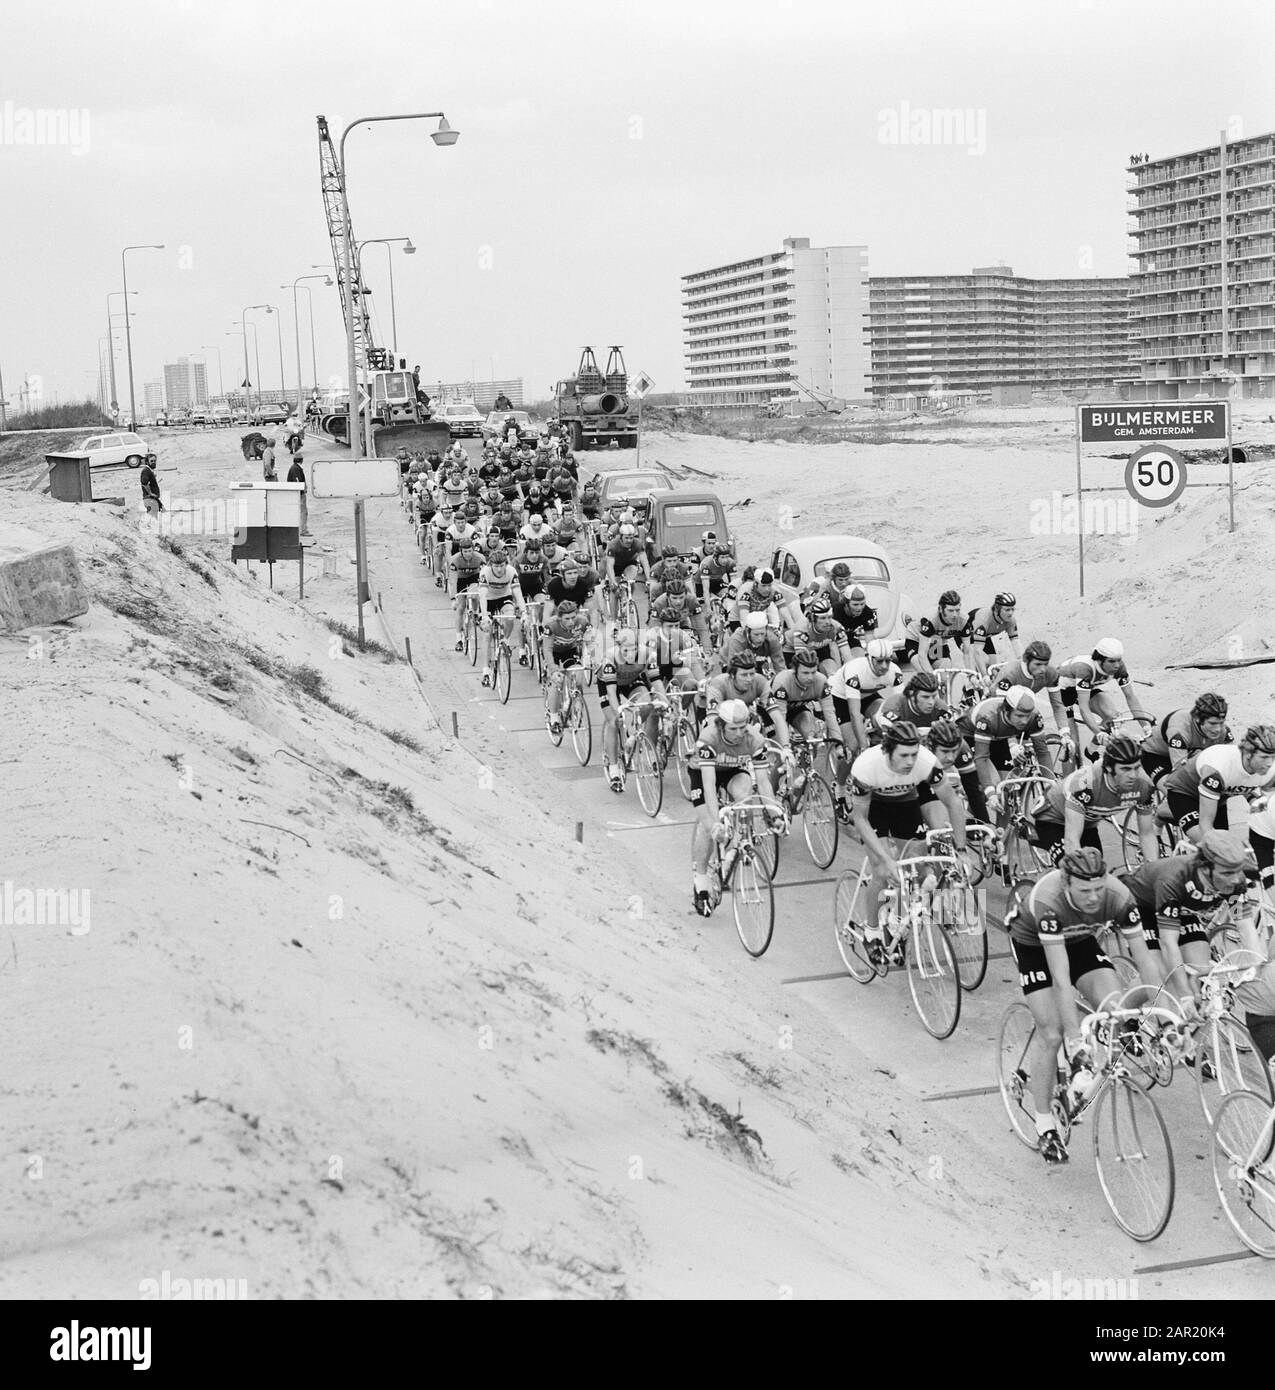 Olympiatour in Amsterdam starts. In the Bijlmer Date: 25 april 1974 Location: Amsterdam, Bijlmermeer Keywords: sport, cycling Institution name: Olympia's Ronde van Nederland Stock Photo